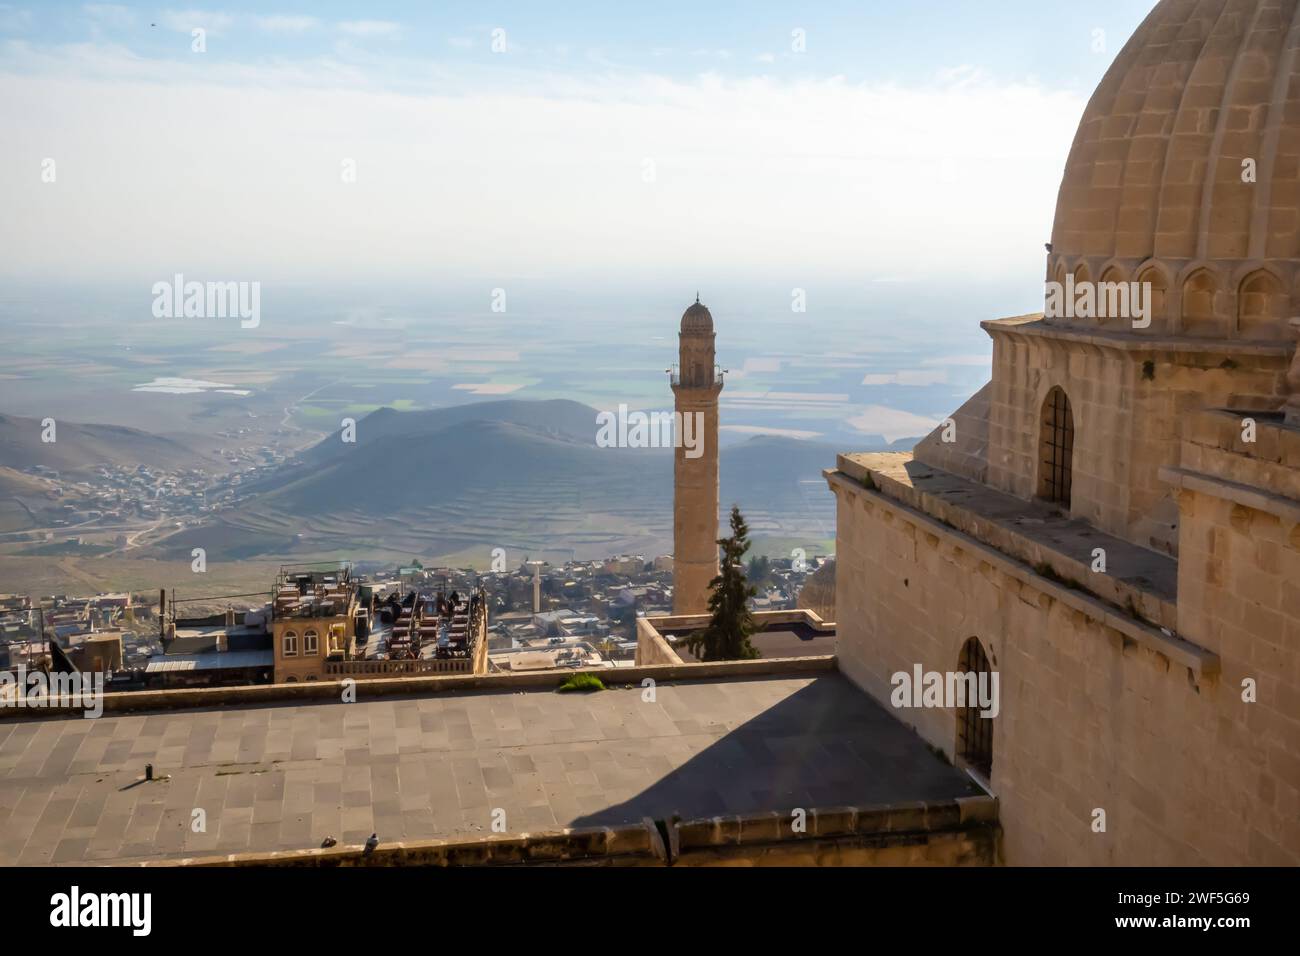 View through the dome of Sultan Isa Medrese or Sultan 'Isa Madrasa, or the Zinciriye Medrese or Isa Bey Medresesi, a landmark in Mardin Stock Photo